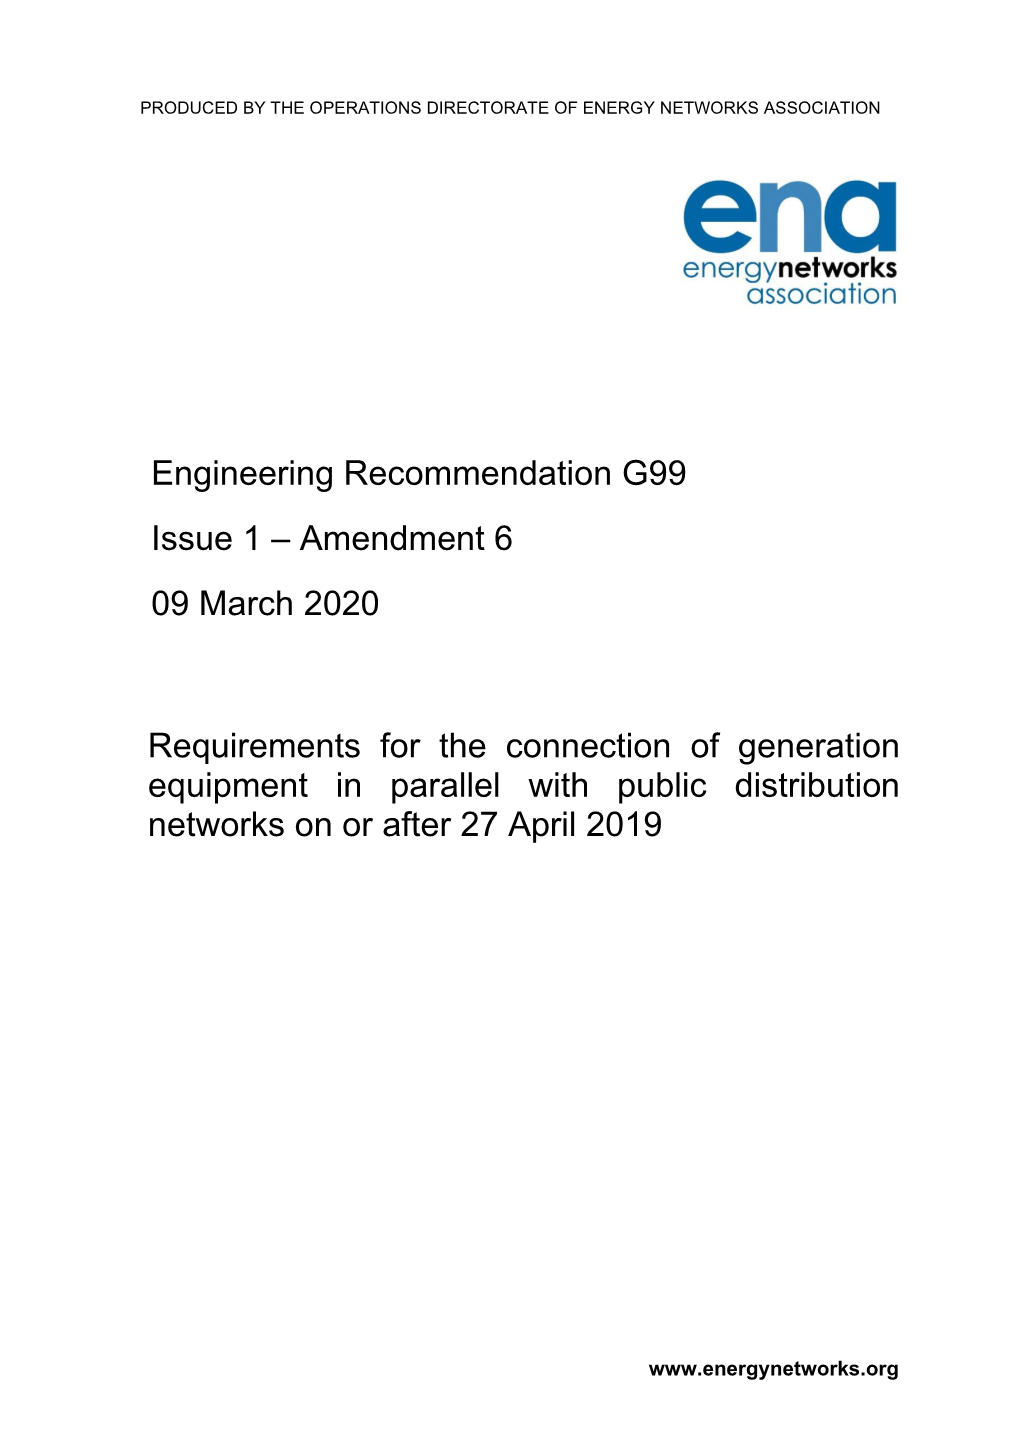 Engineering Recommendation G99 Issue 1 – Amendment 6 09 March 2020 Requirements for the Connection of Generation Equipment In